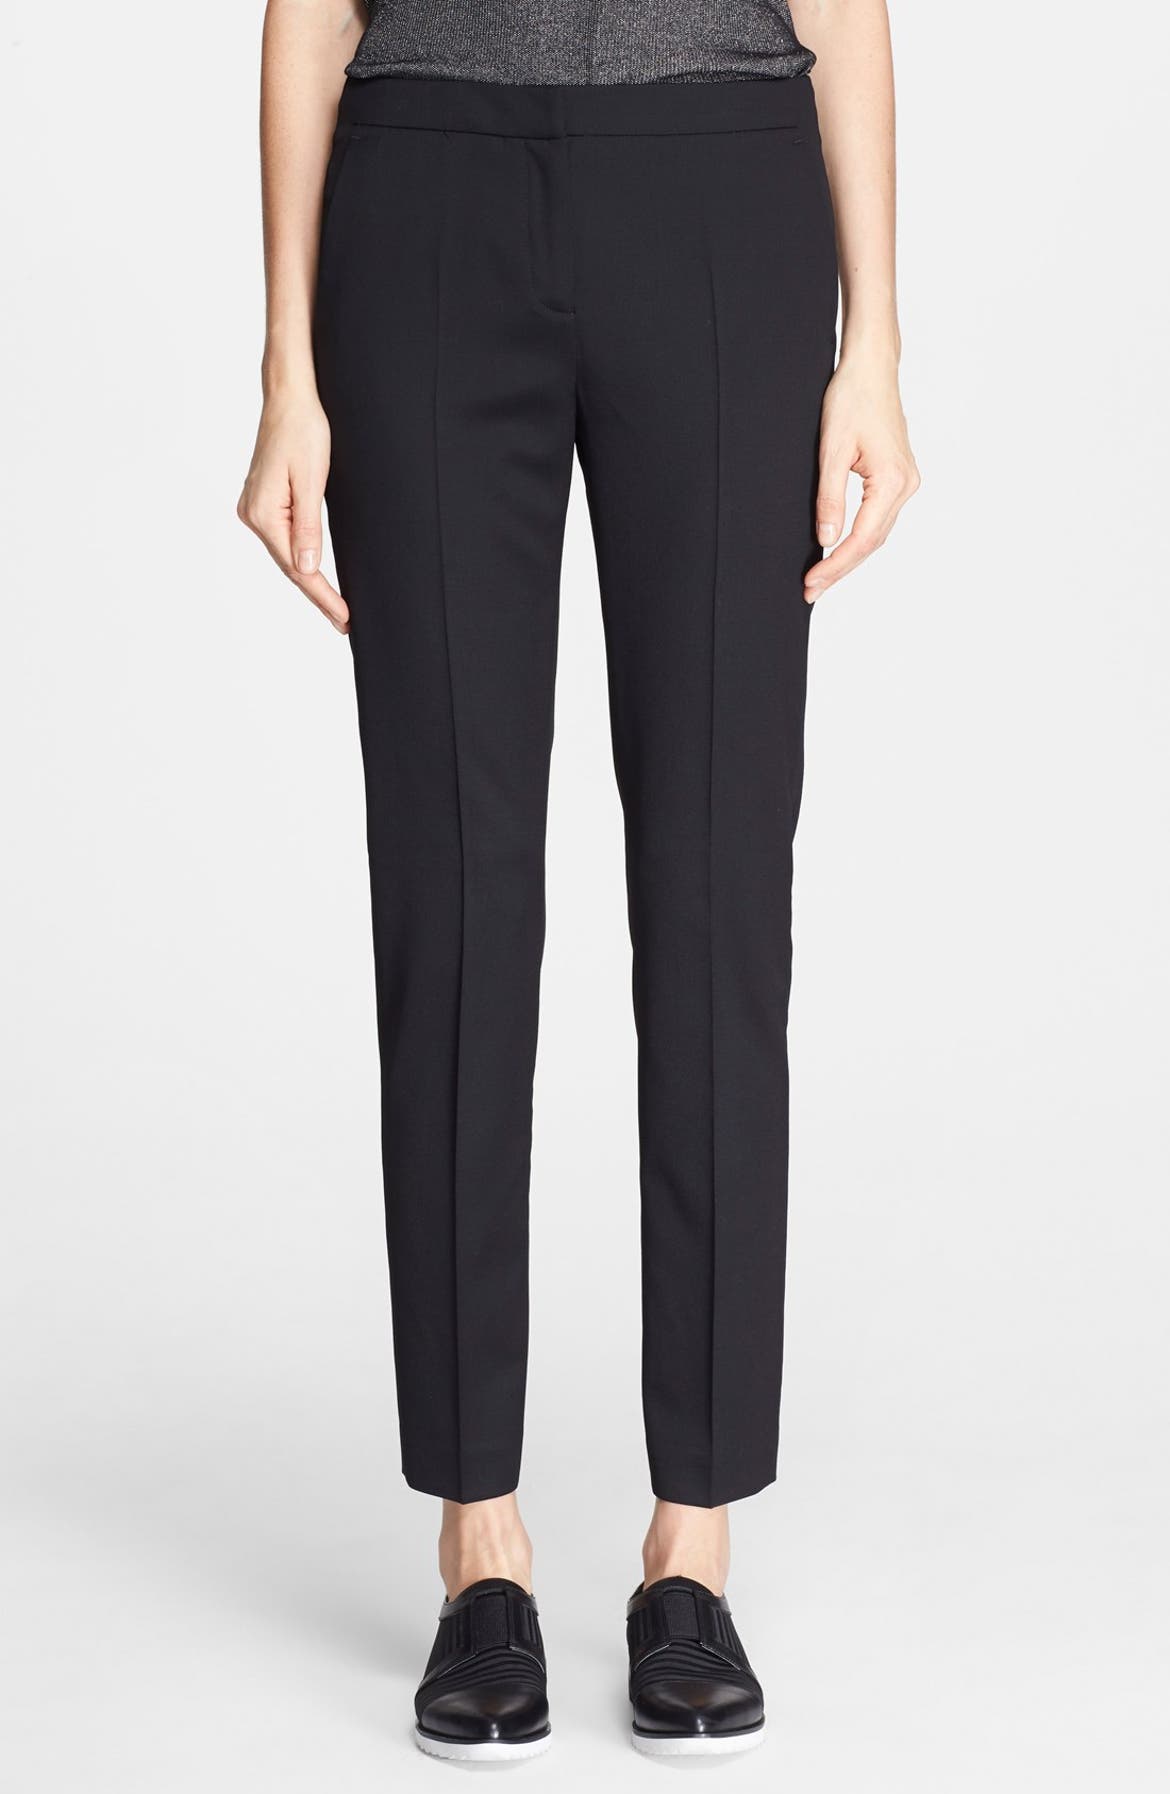 The Kooples Stretch Wool Trousers | Nordstrom